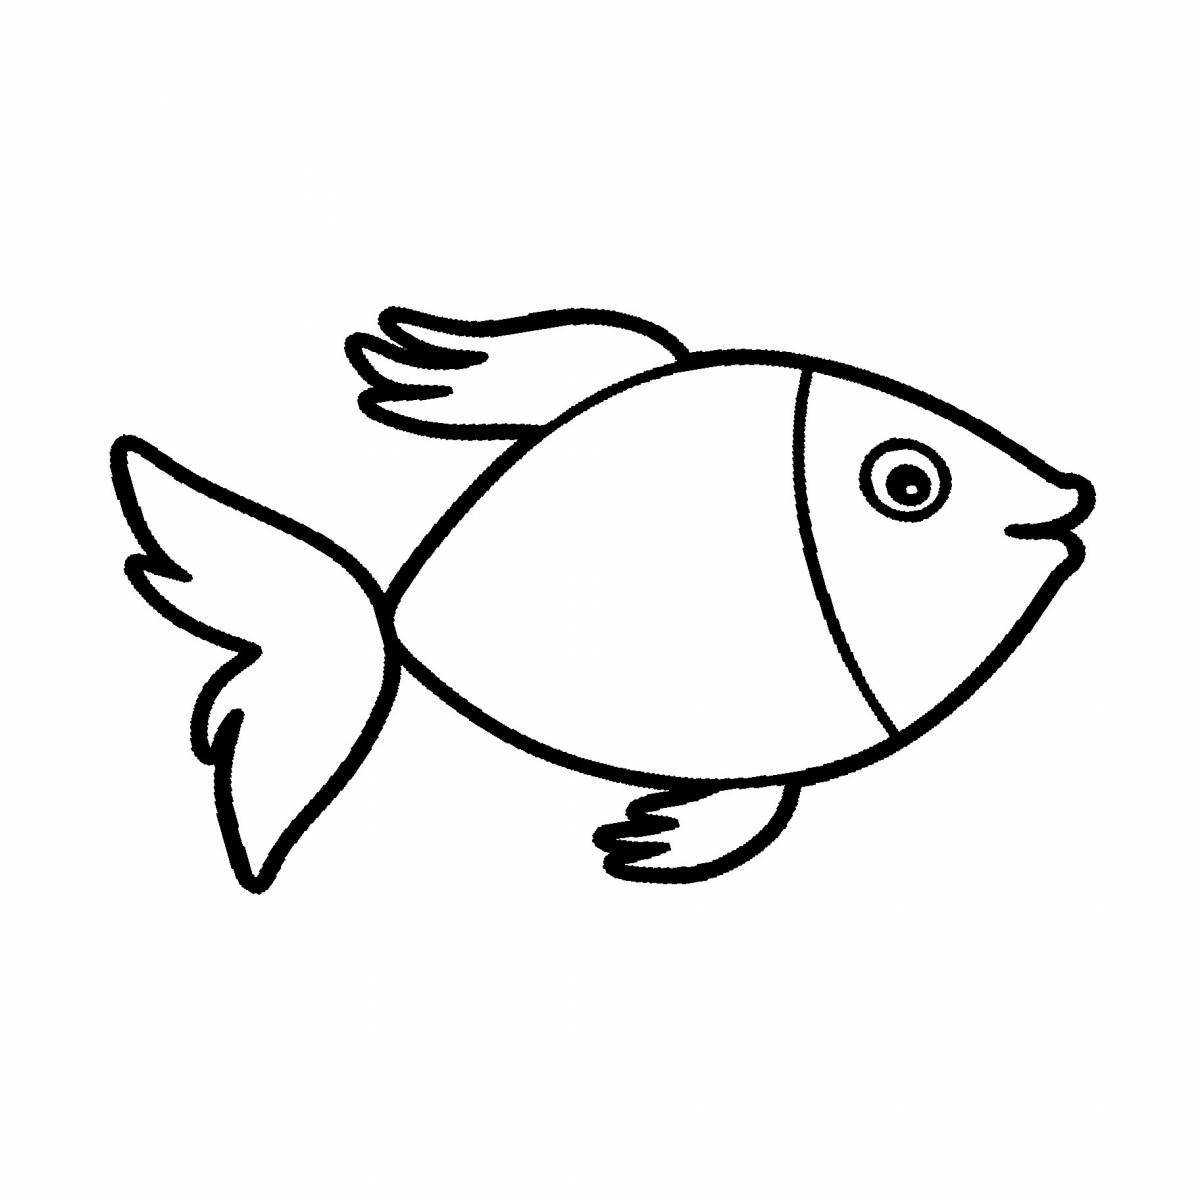 Dazzling fish coloring book for kids